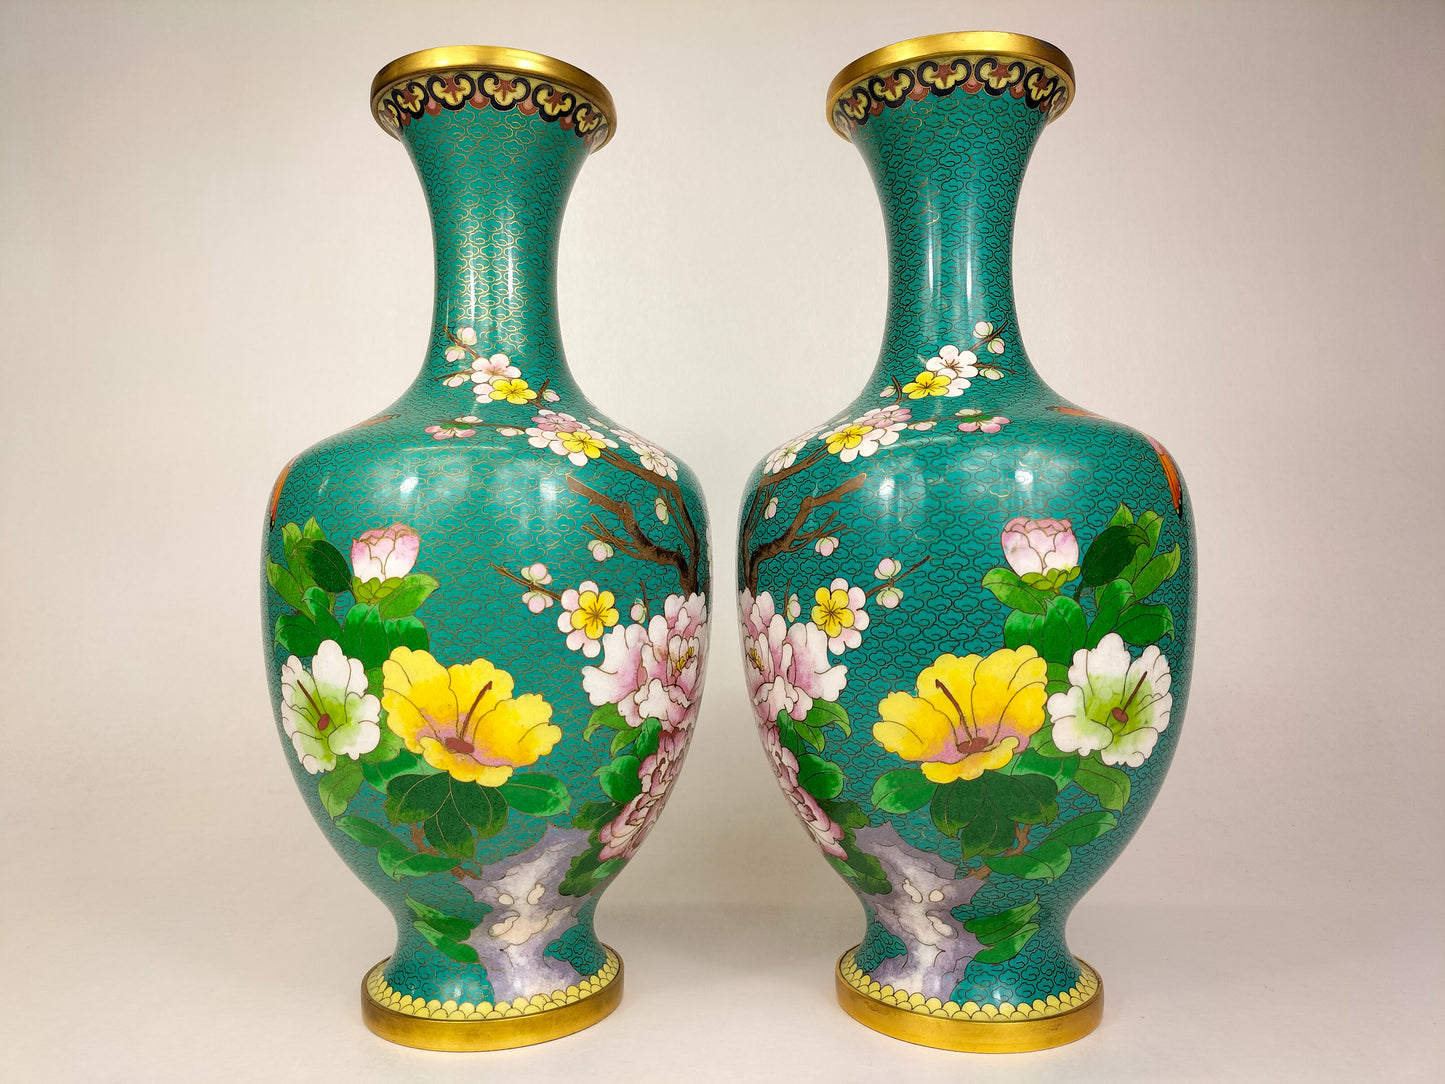 Pair of large Chinese cloisonne vases decorated with flowers // 20th century